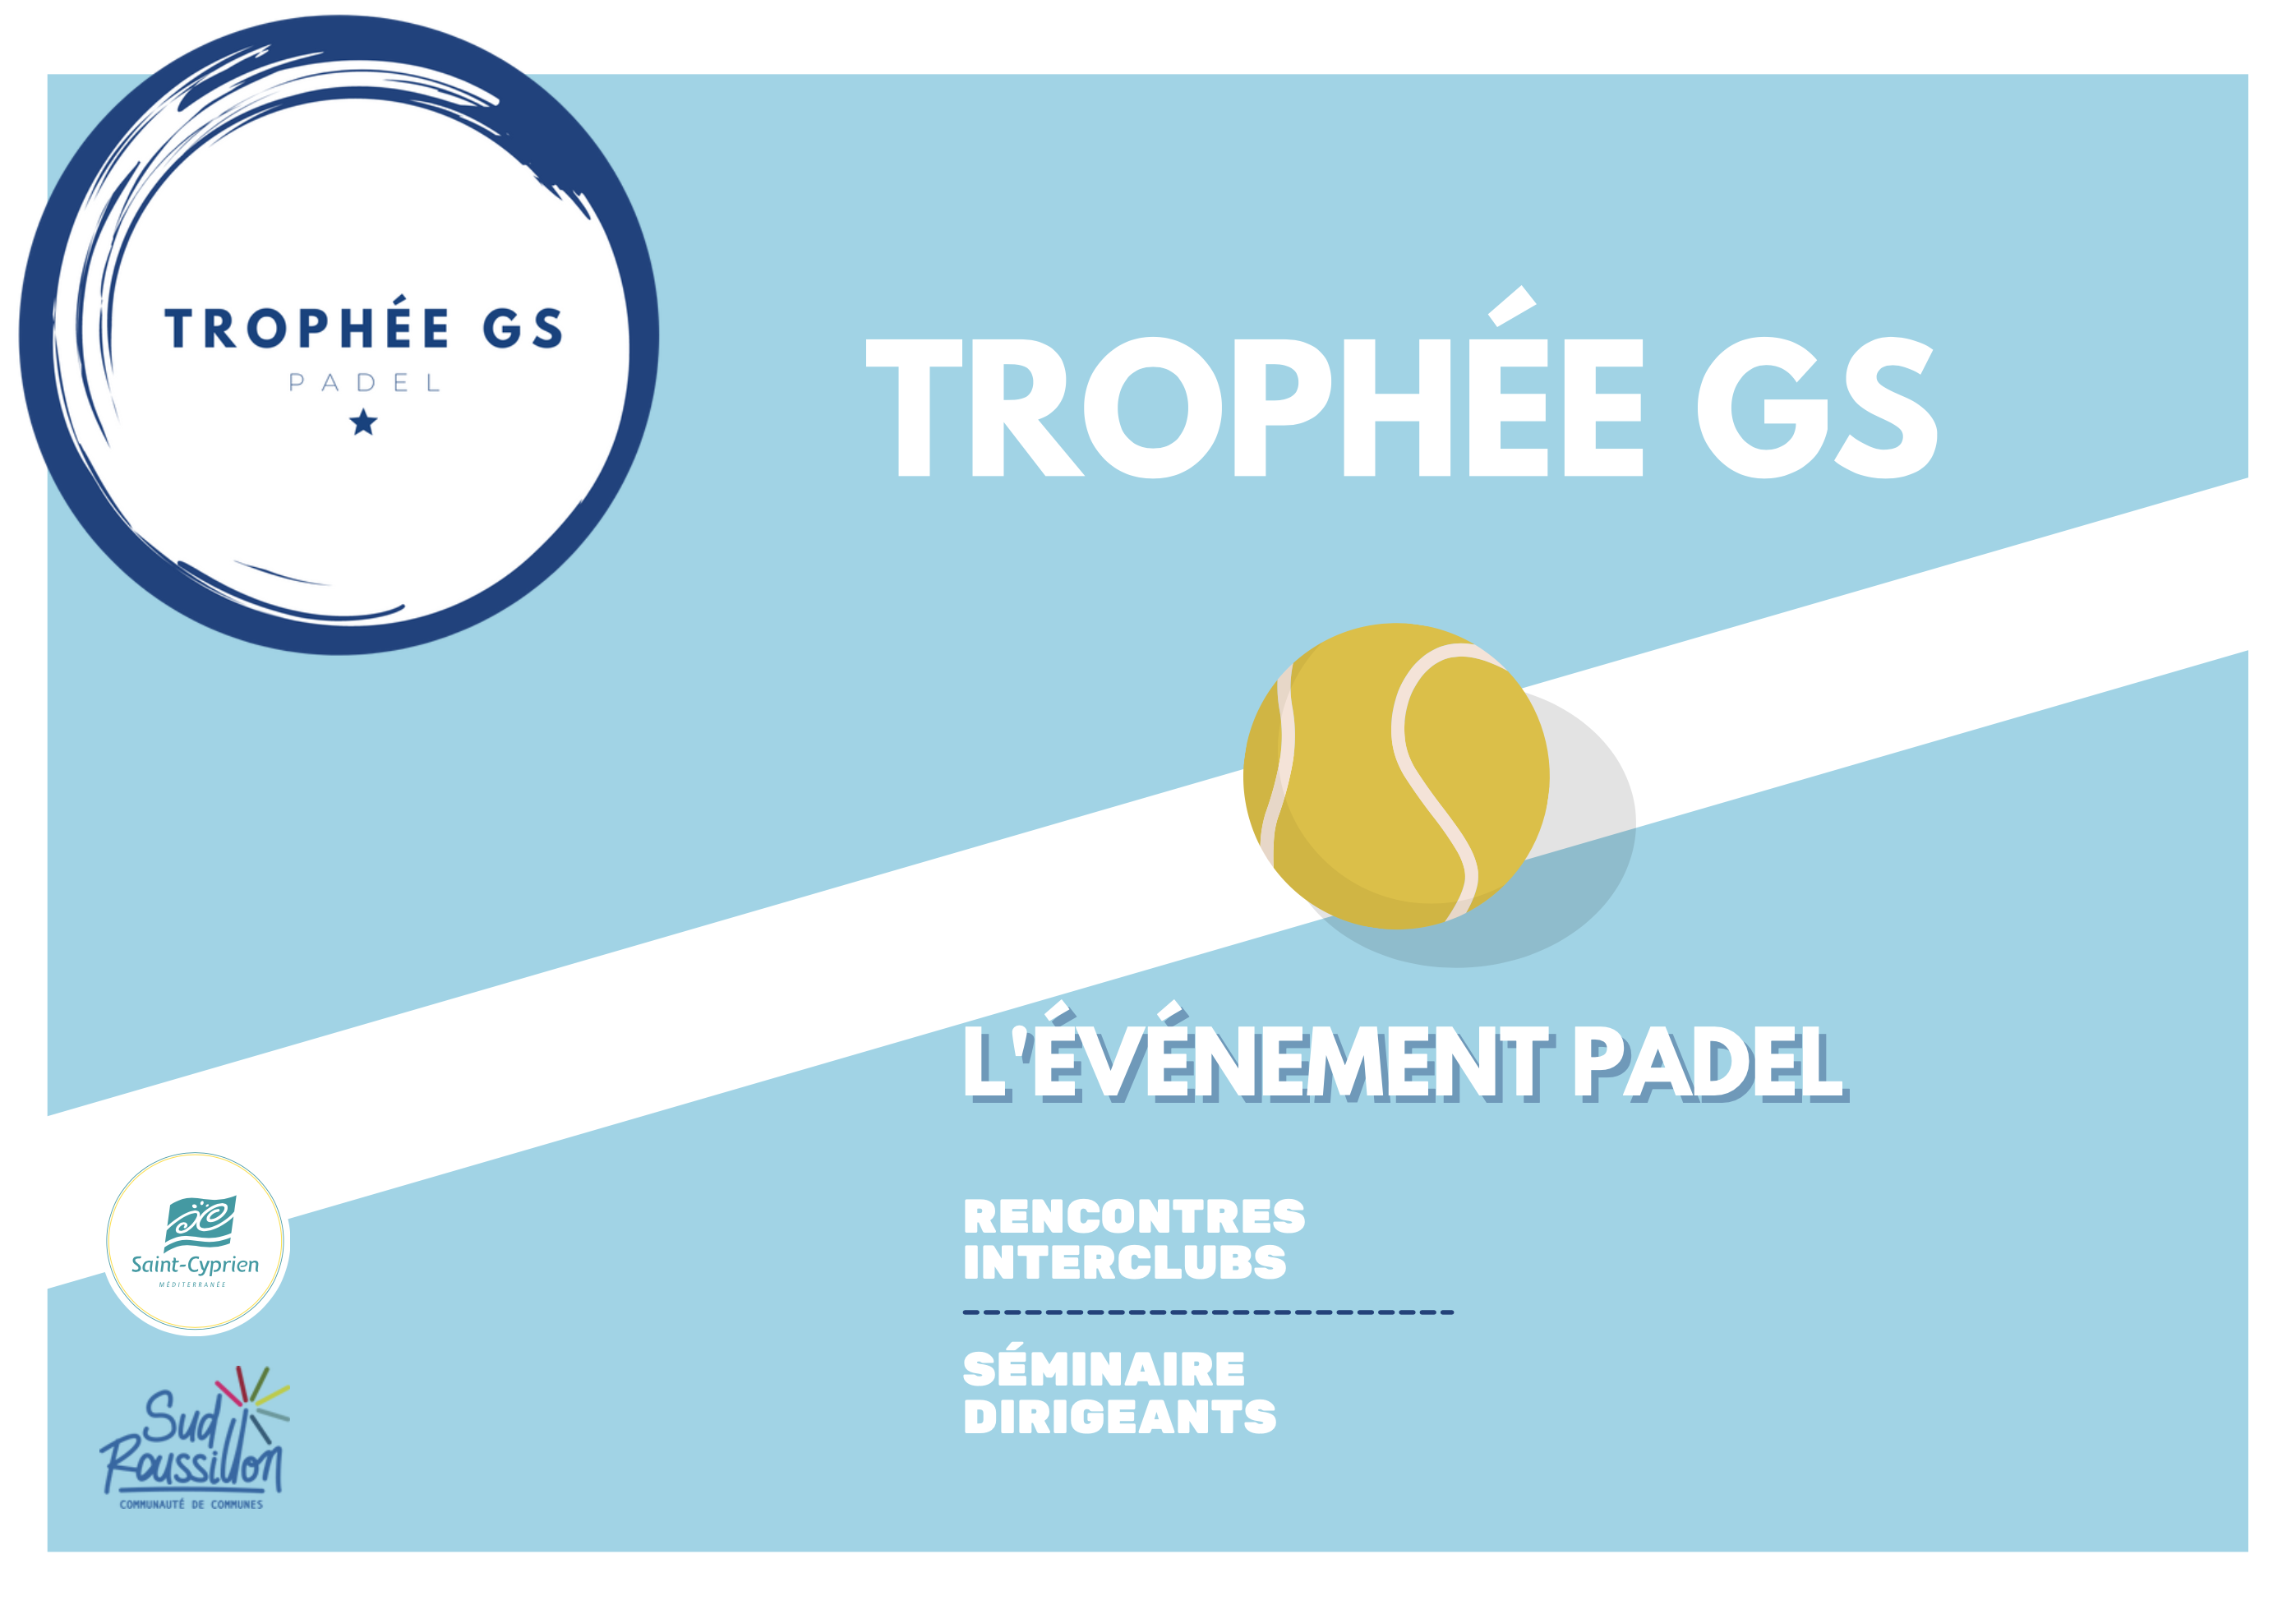 The GS Trophy: an expected event that will make people happy